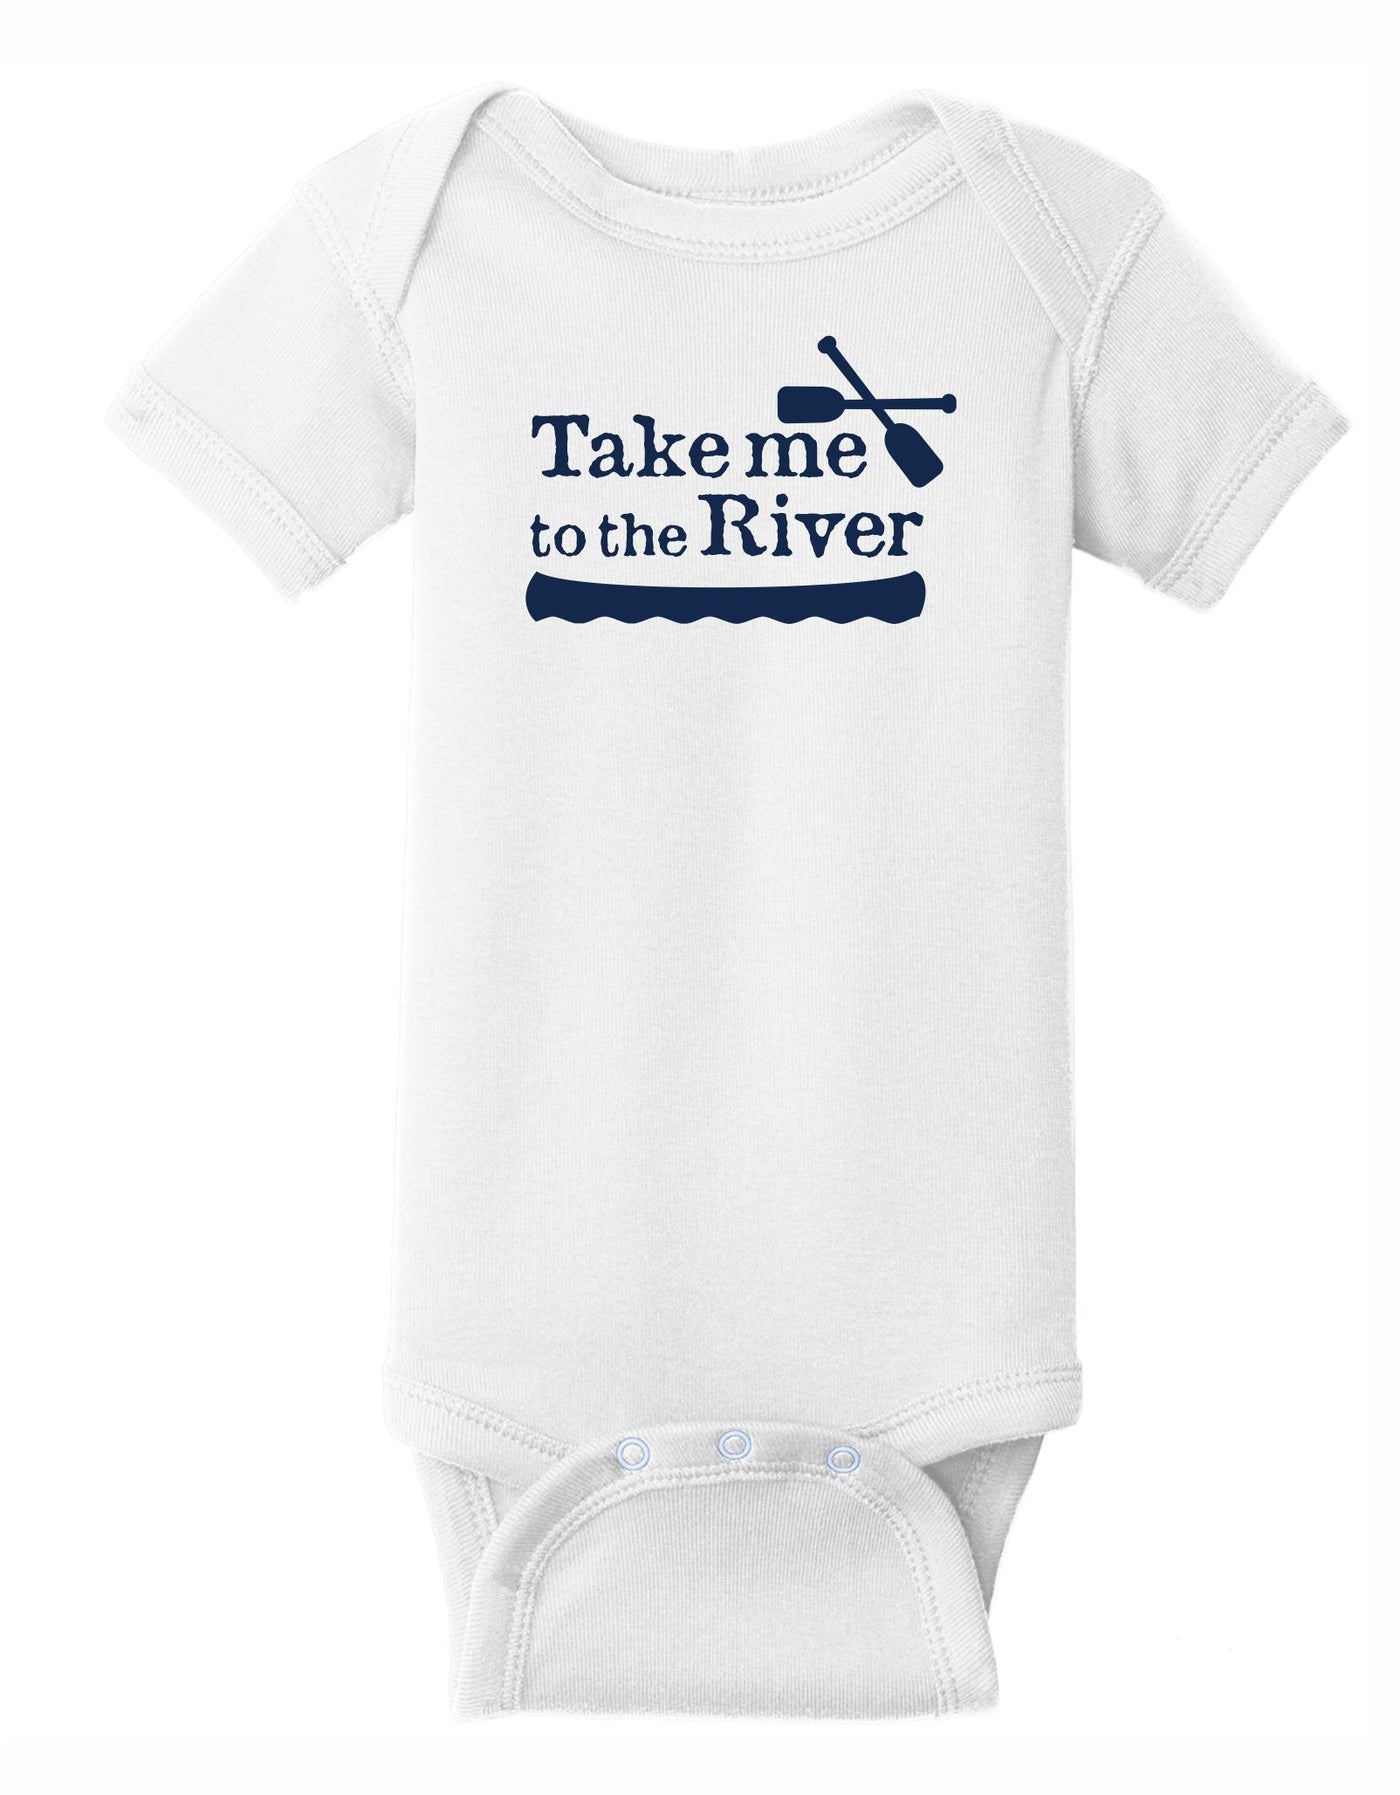 Take me to the river onesie